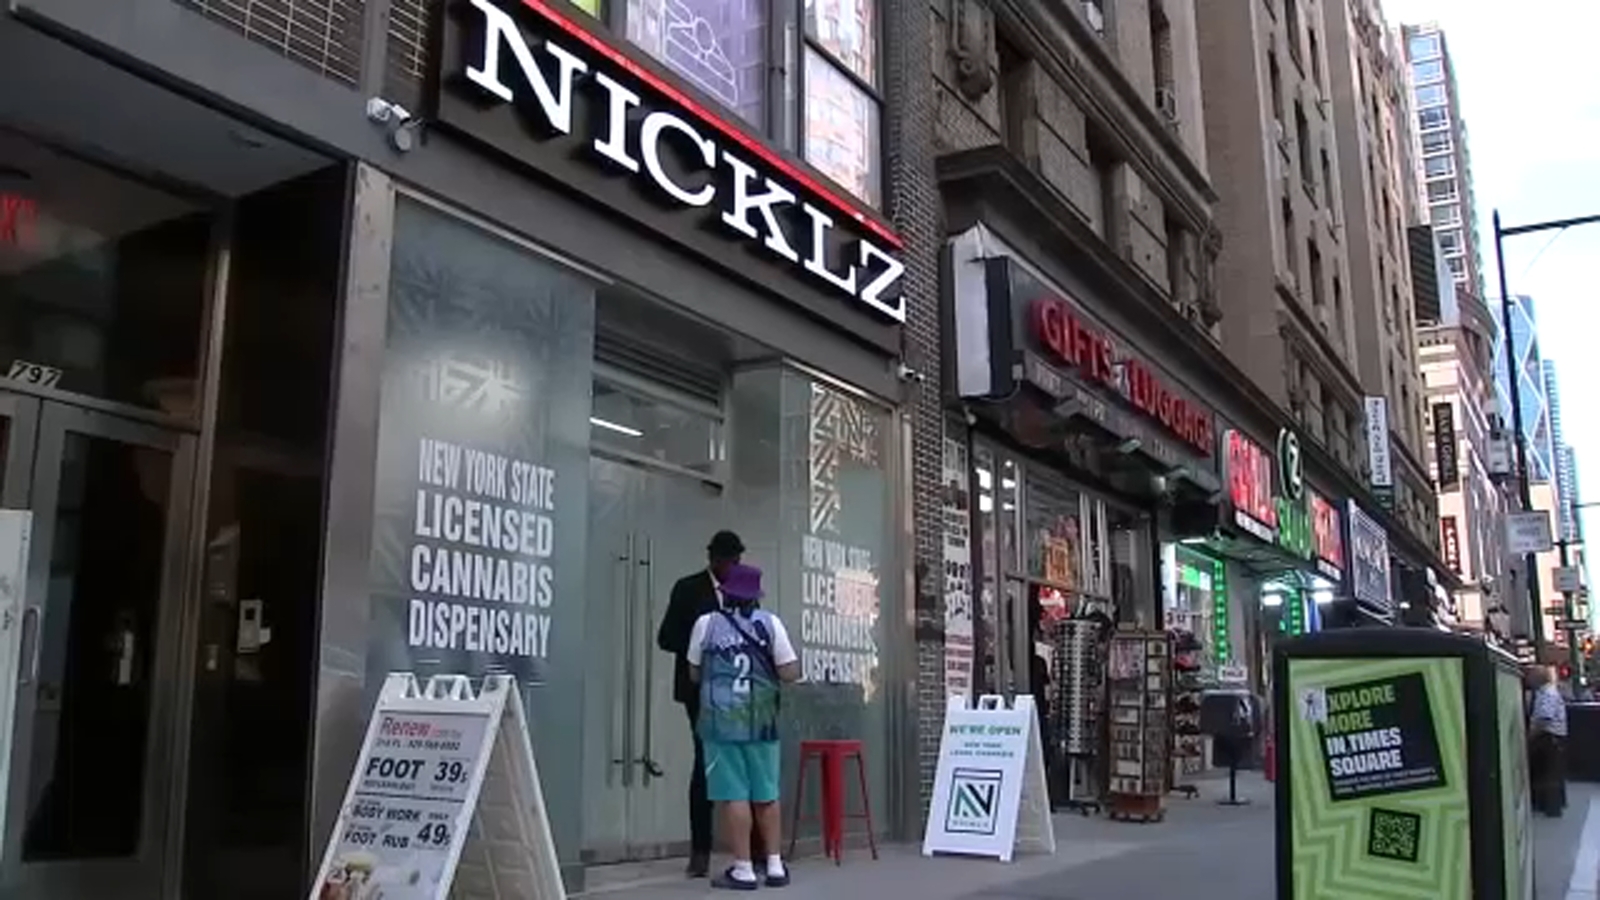 State-licensed cannabis shop opening near Times Square will legally sell state-approved products [Video]